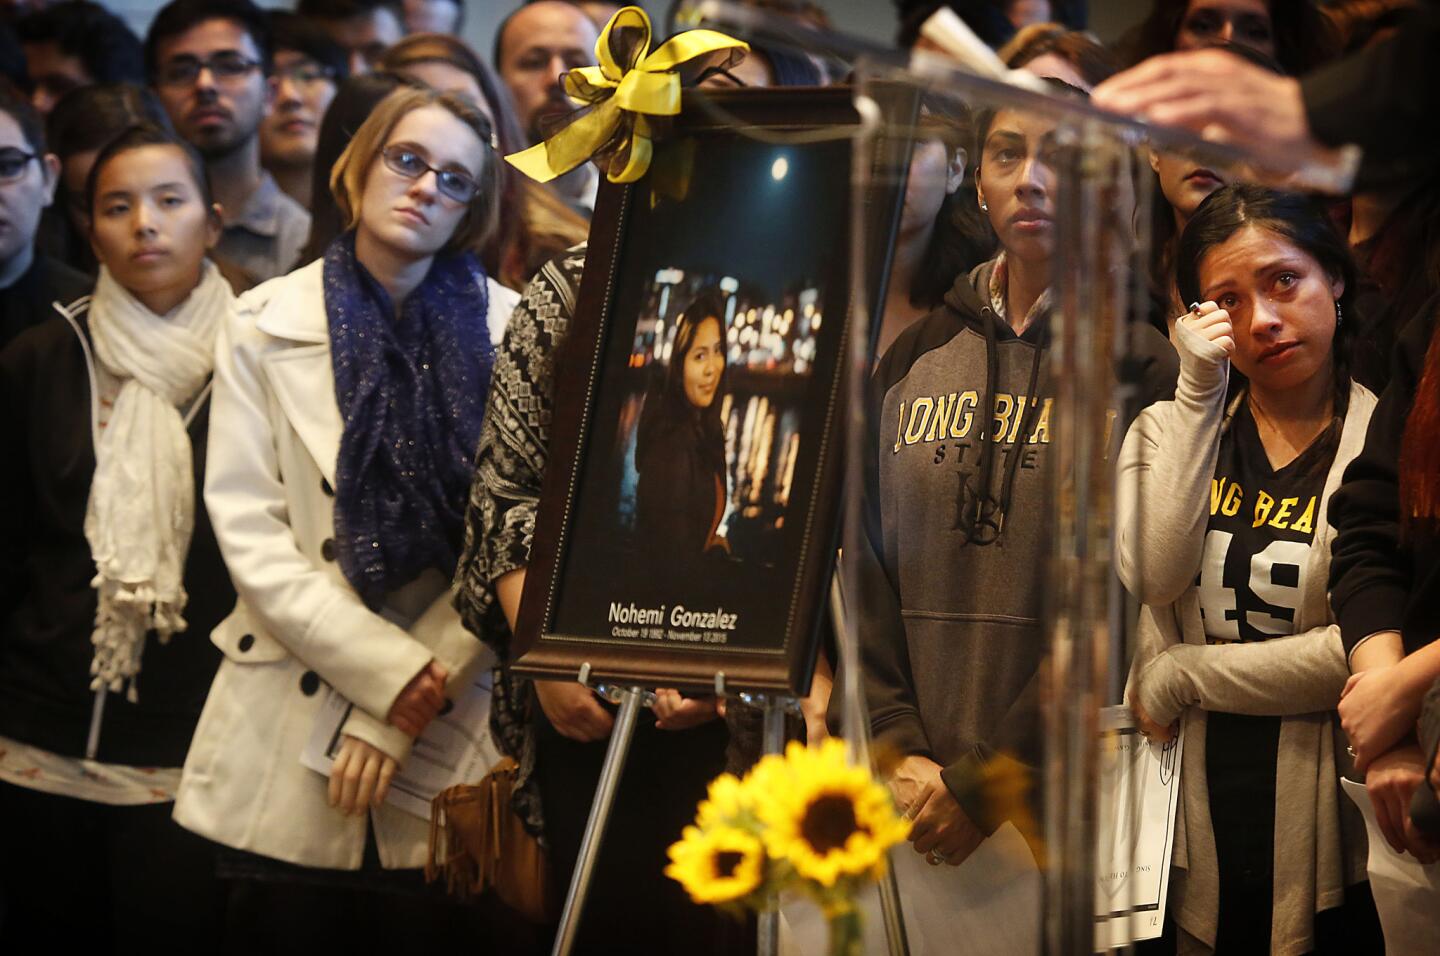 Mourners stand at a Nov. 15 Cal State Long Beach memorial service for 23-year-old industrial design student Nohemi Gonzalez, killed in the Paris terror attacks.